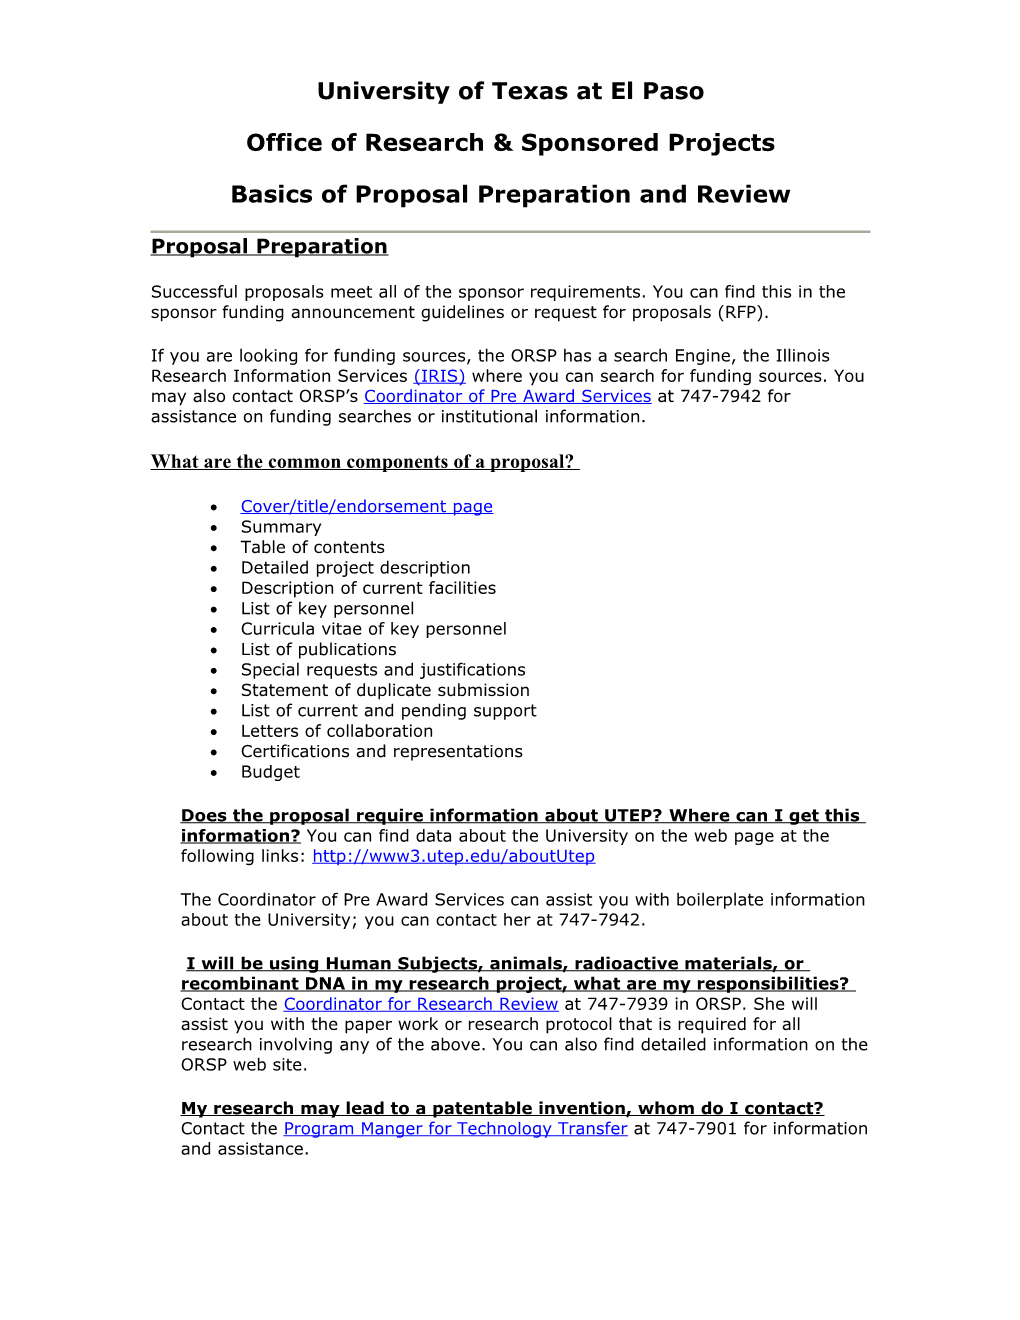 Basics of Proposal Preparation and Review